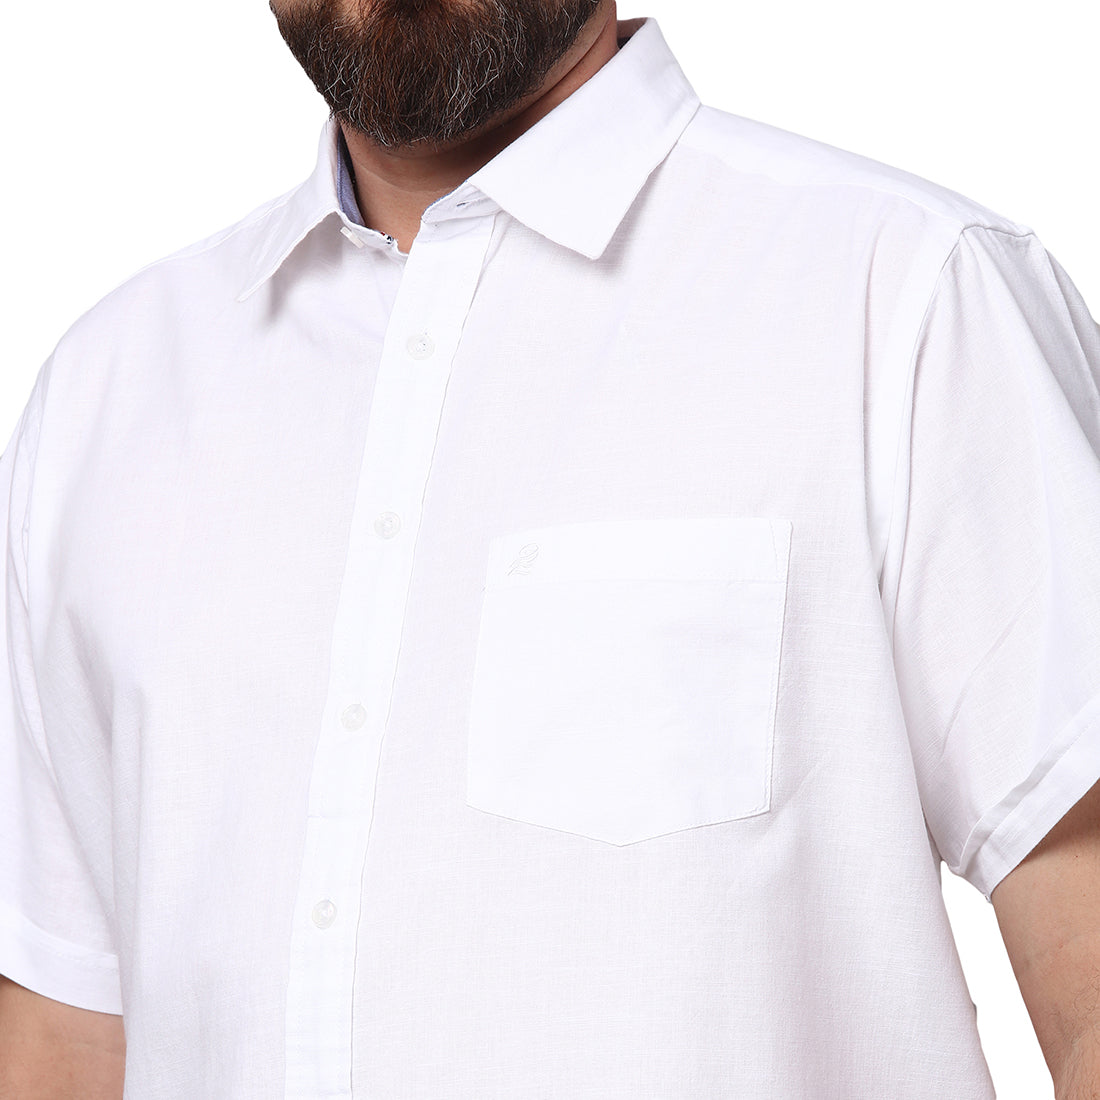 Big & Bold Solid White Half Sleeves Slim Fit Casual Shirts (Plus Size) - Double Two